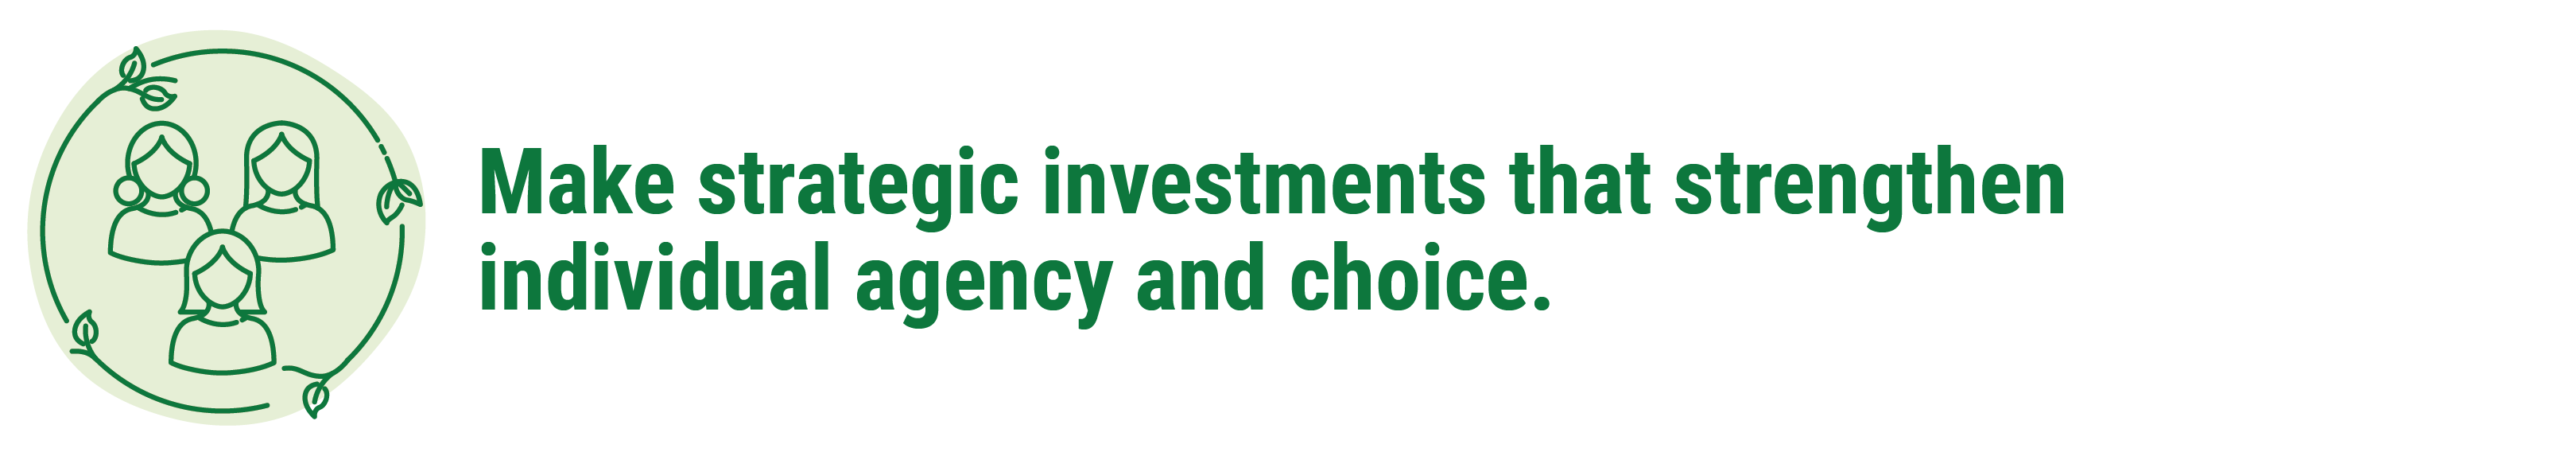 Make strategic investments that strengthen individual agency and choice.